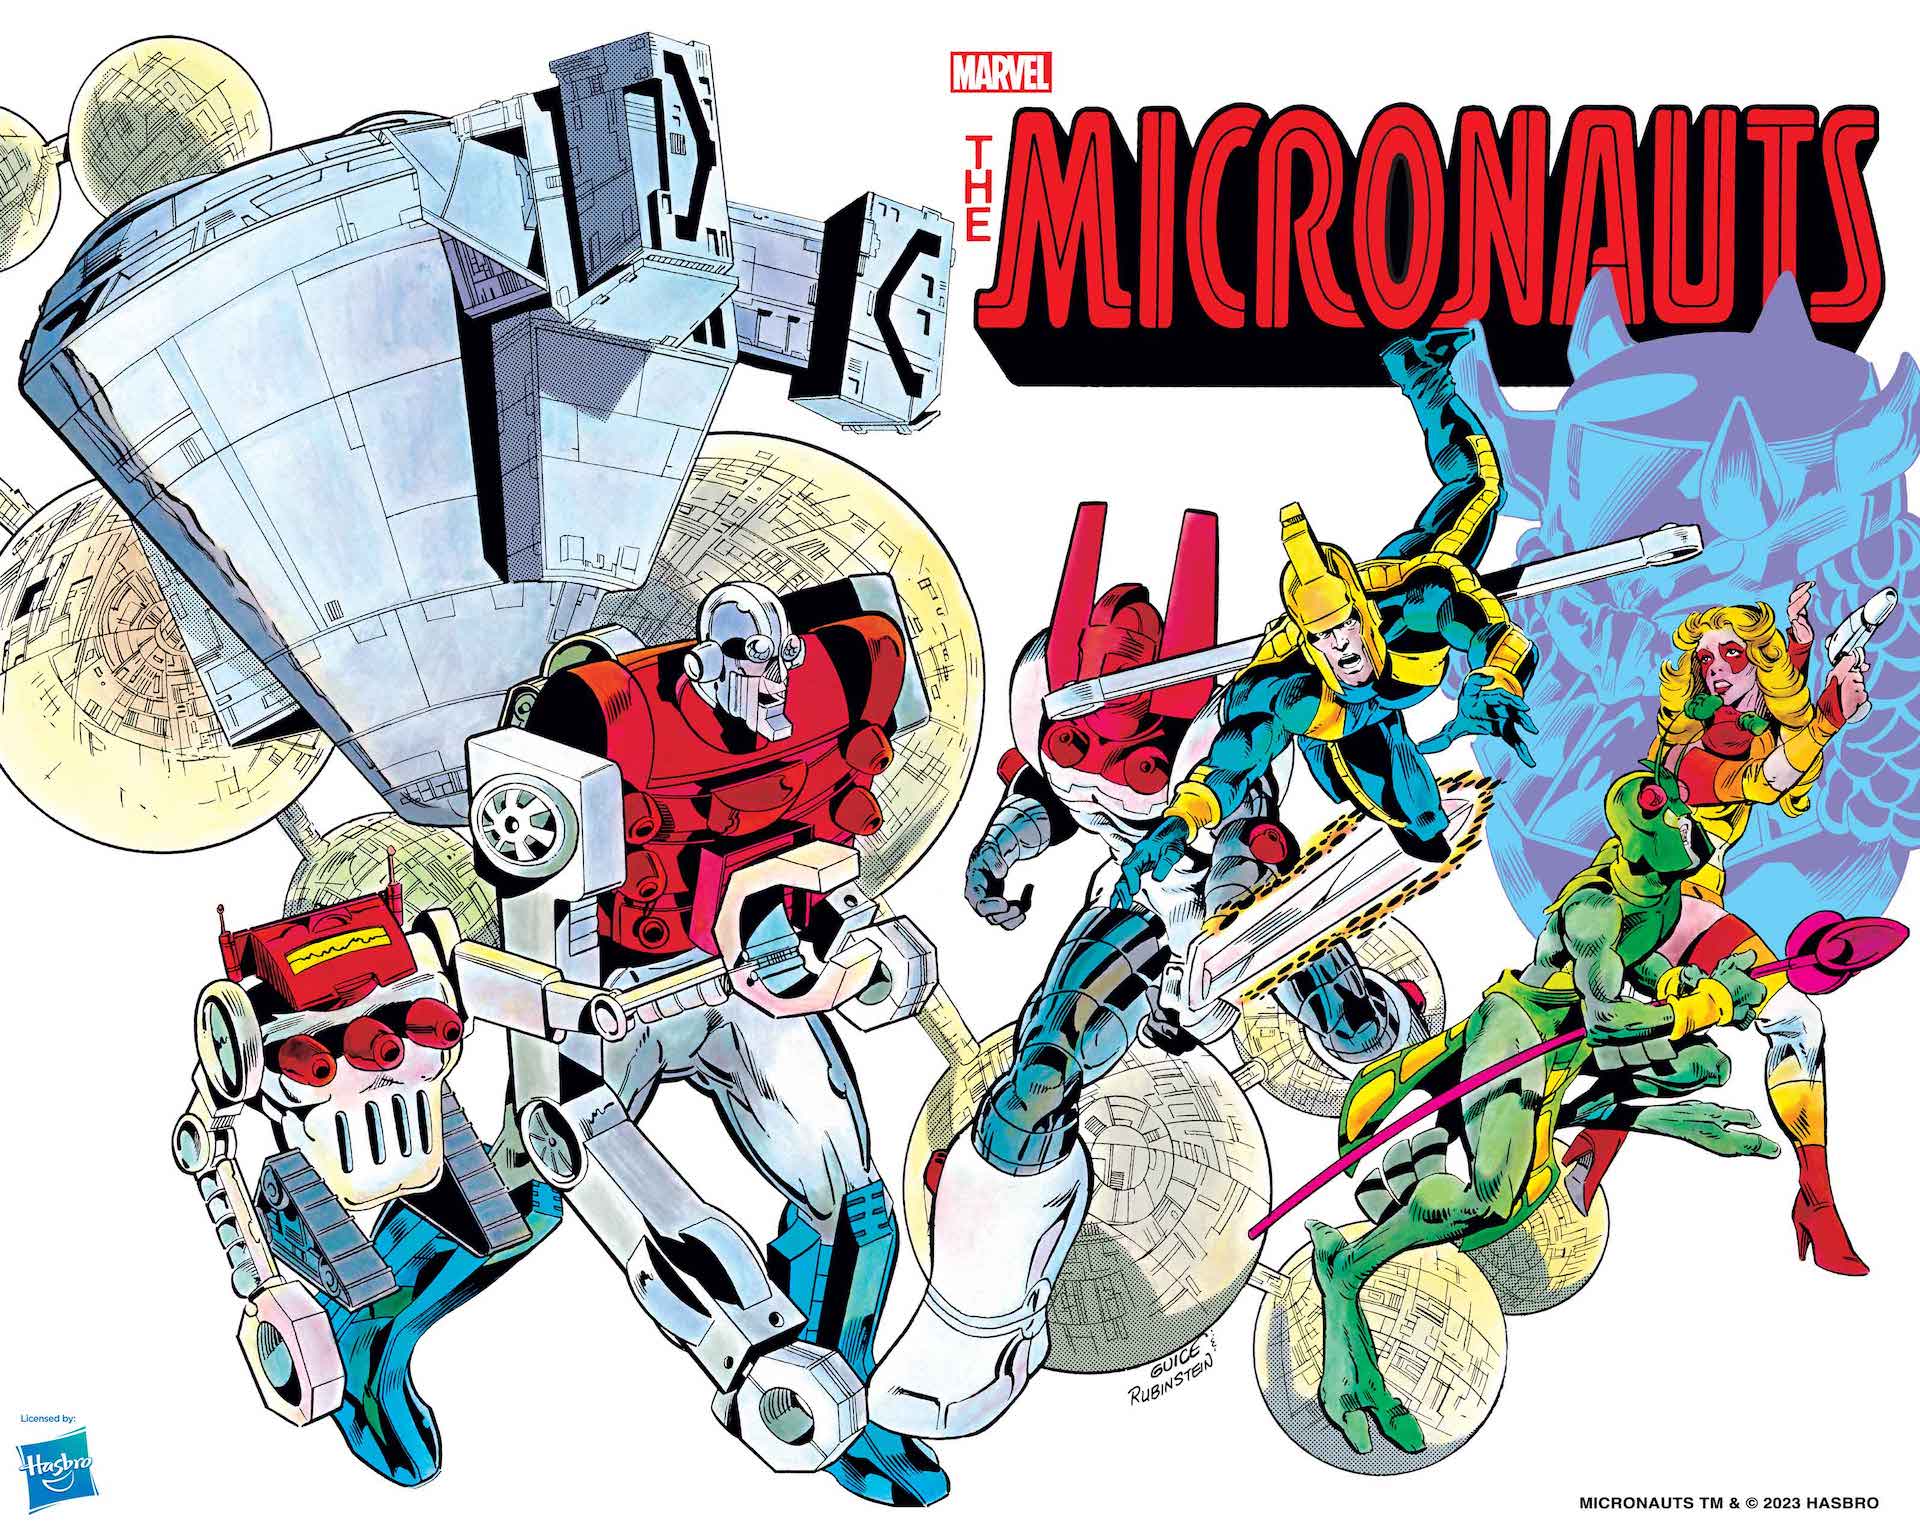 Marvel adds 'The Micronauts' to release schedule in 2024